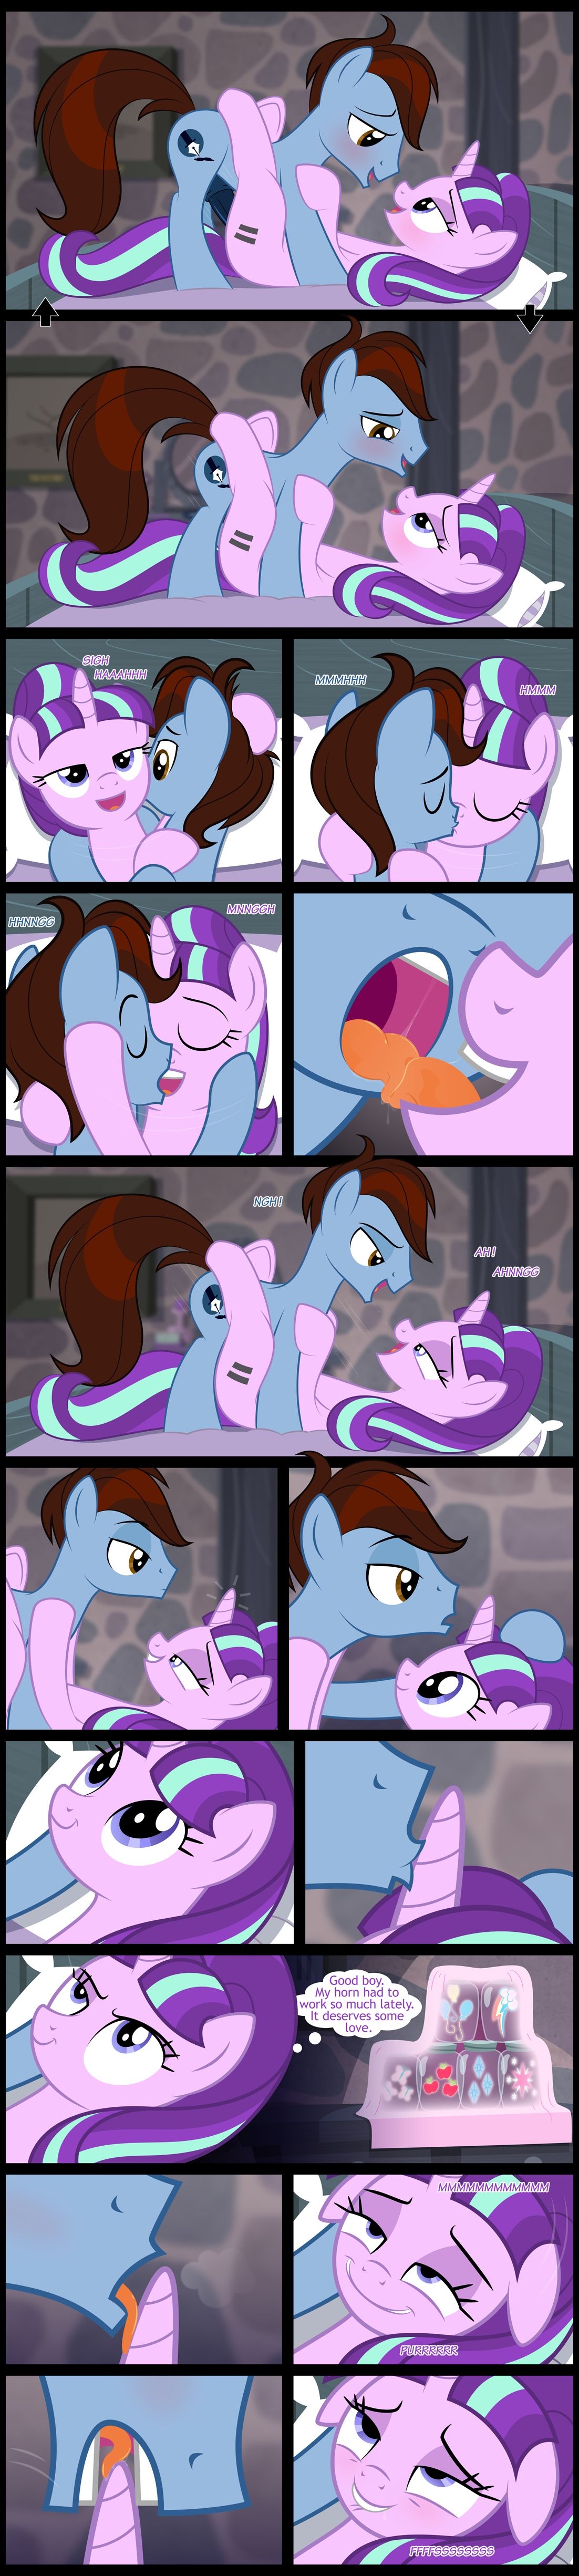 [Culu-Bluebeaver] The Newcomer (My Little Pony: Friendship is Magic) 5